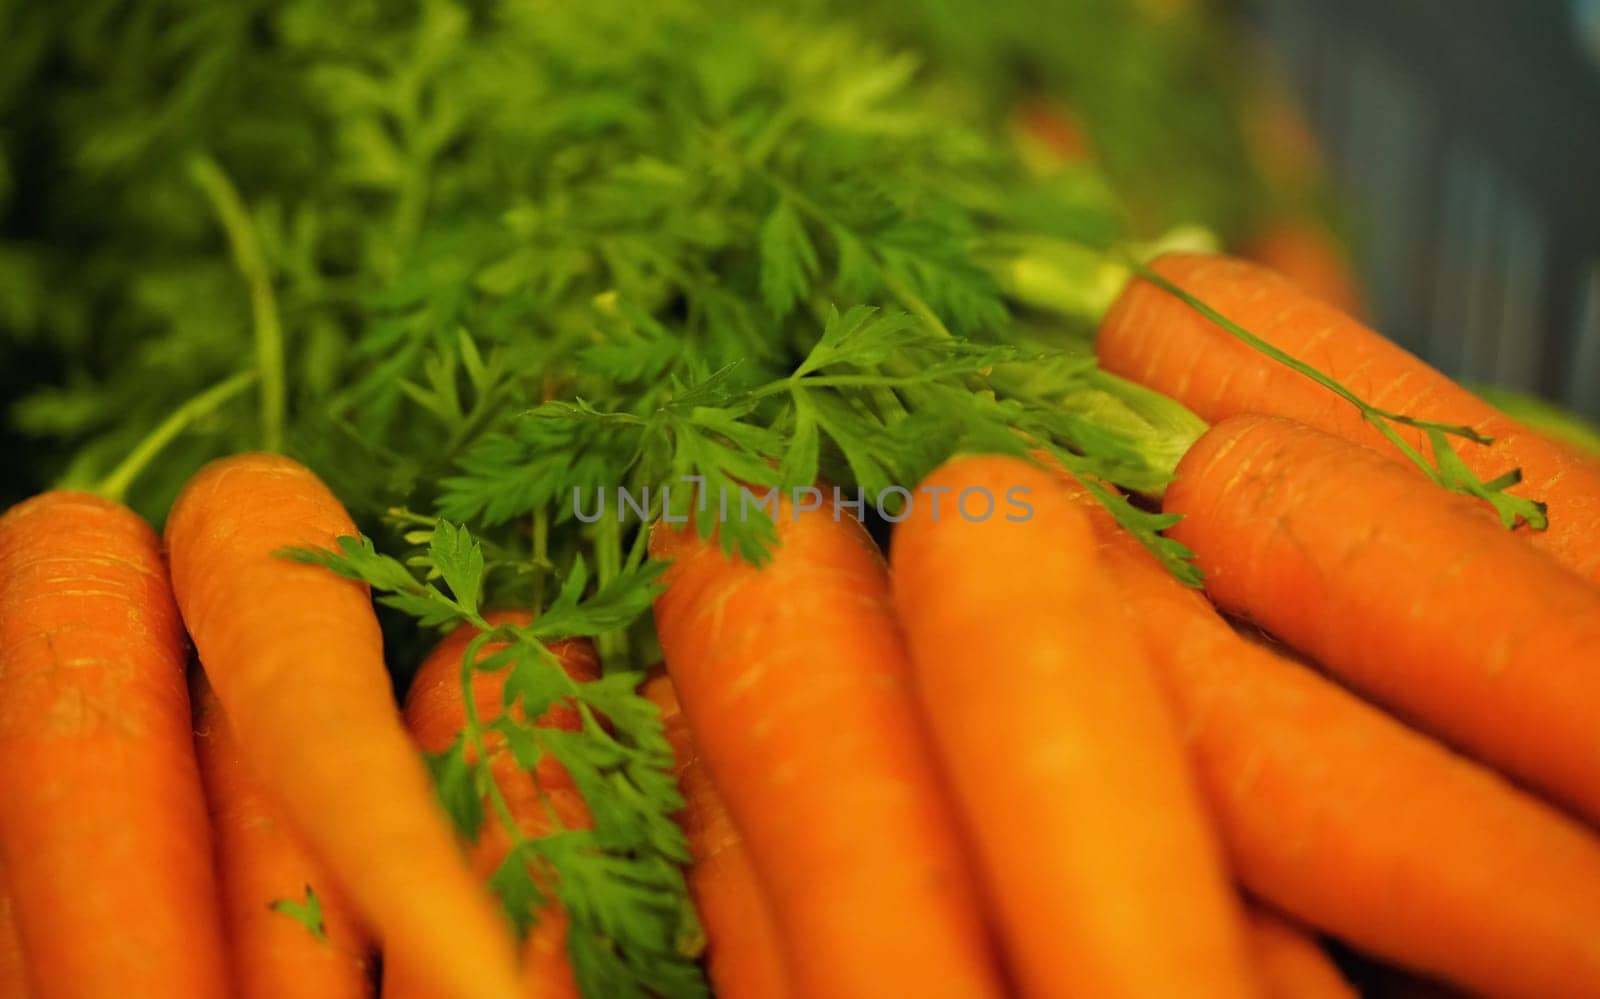 Bunch of bright orange carrots with green leaves, shallow depth of field photo, only small part of orange tuber in focus